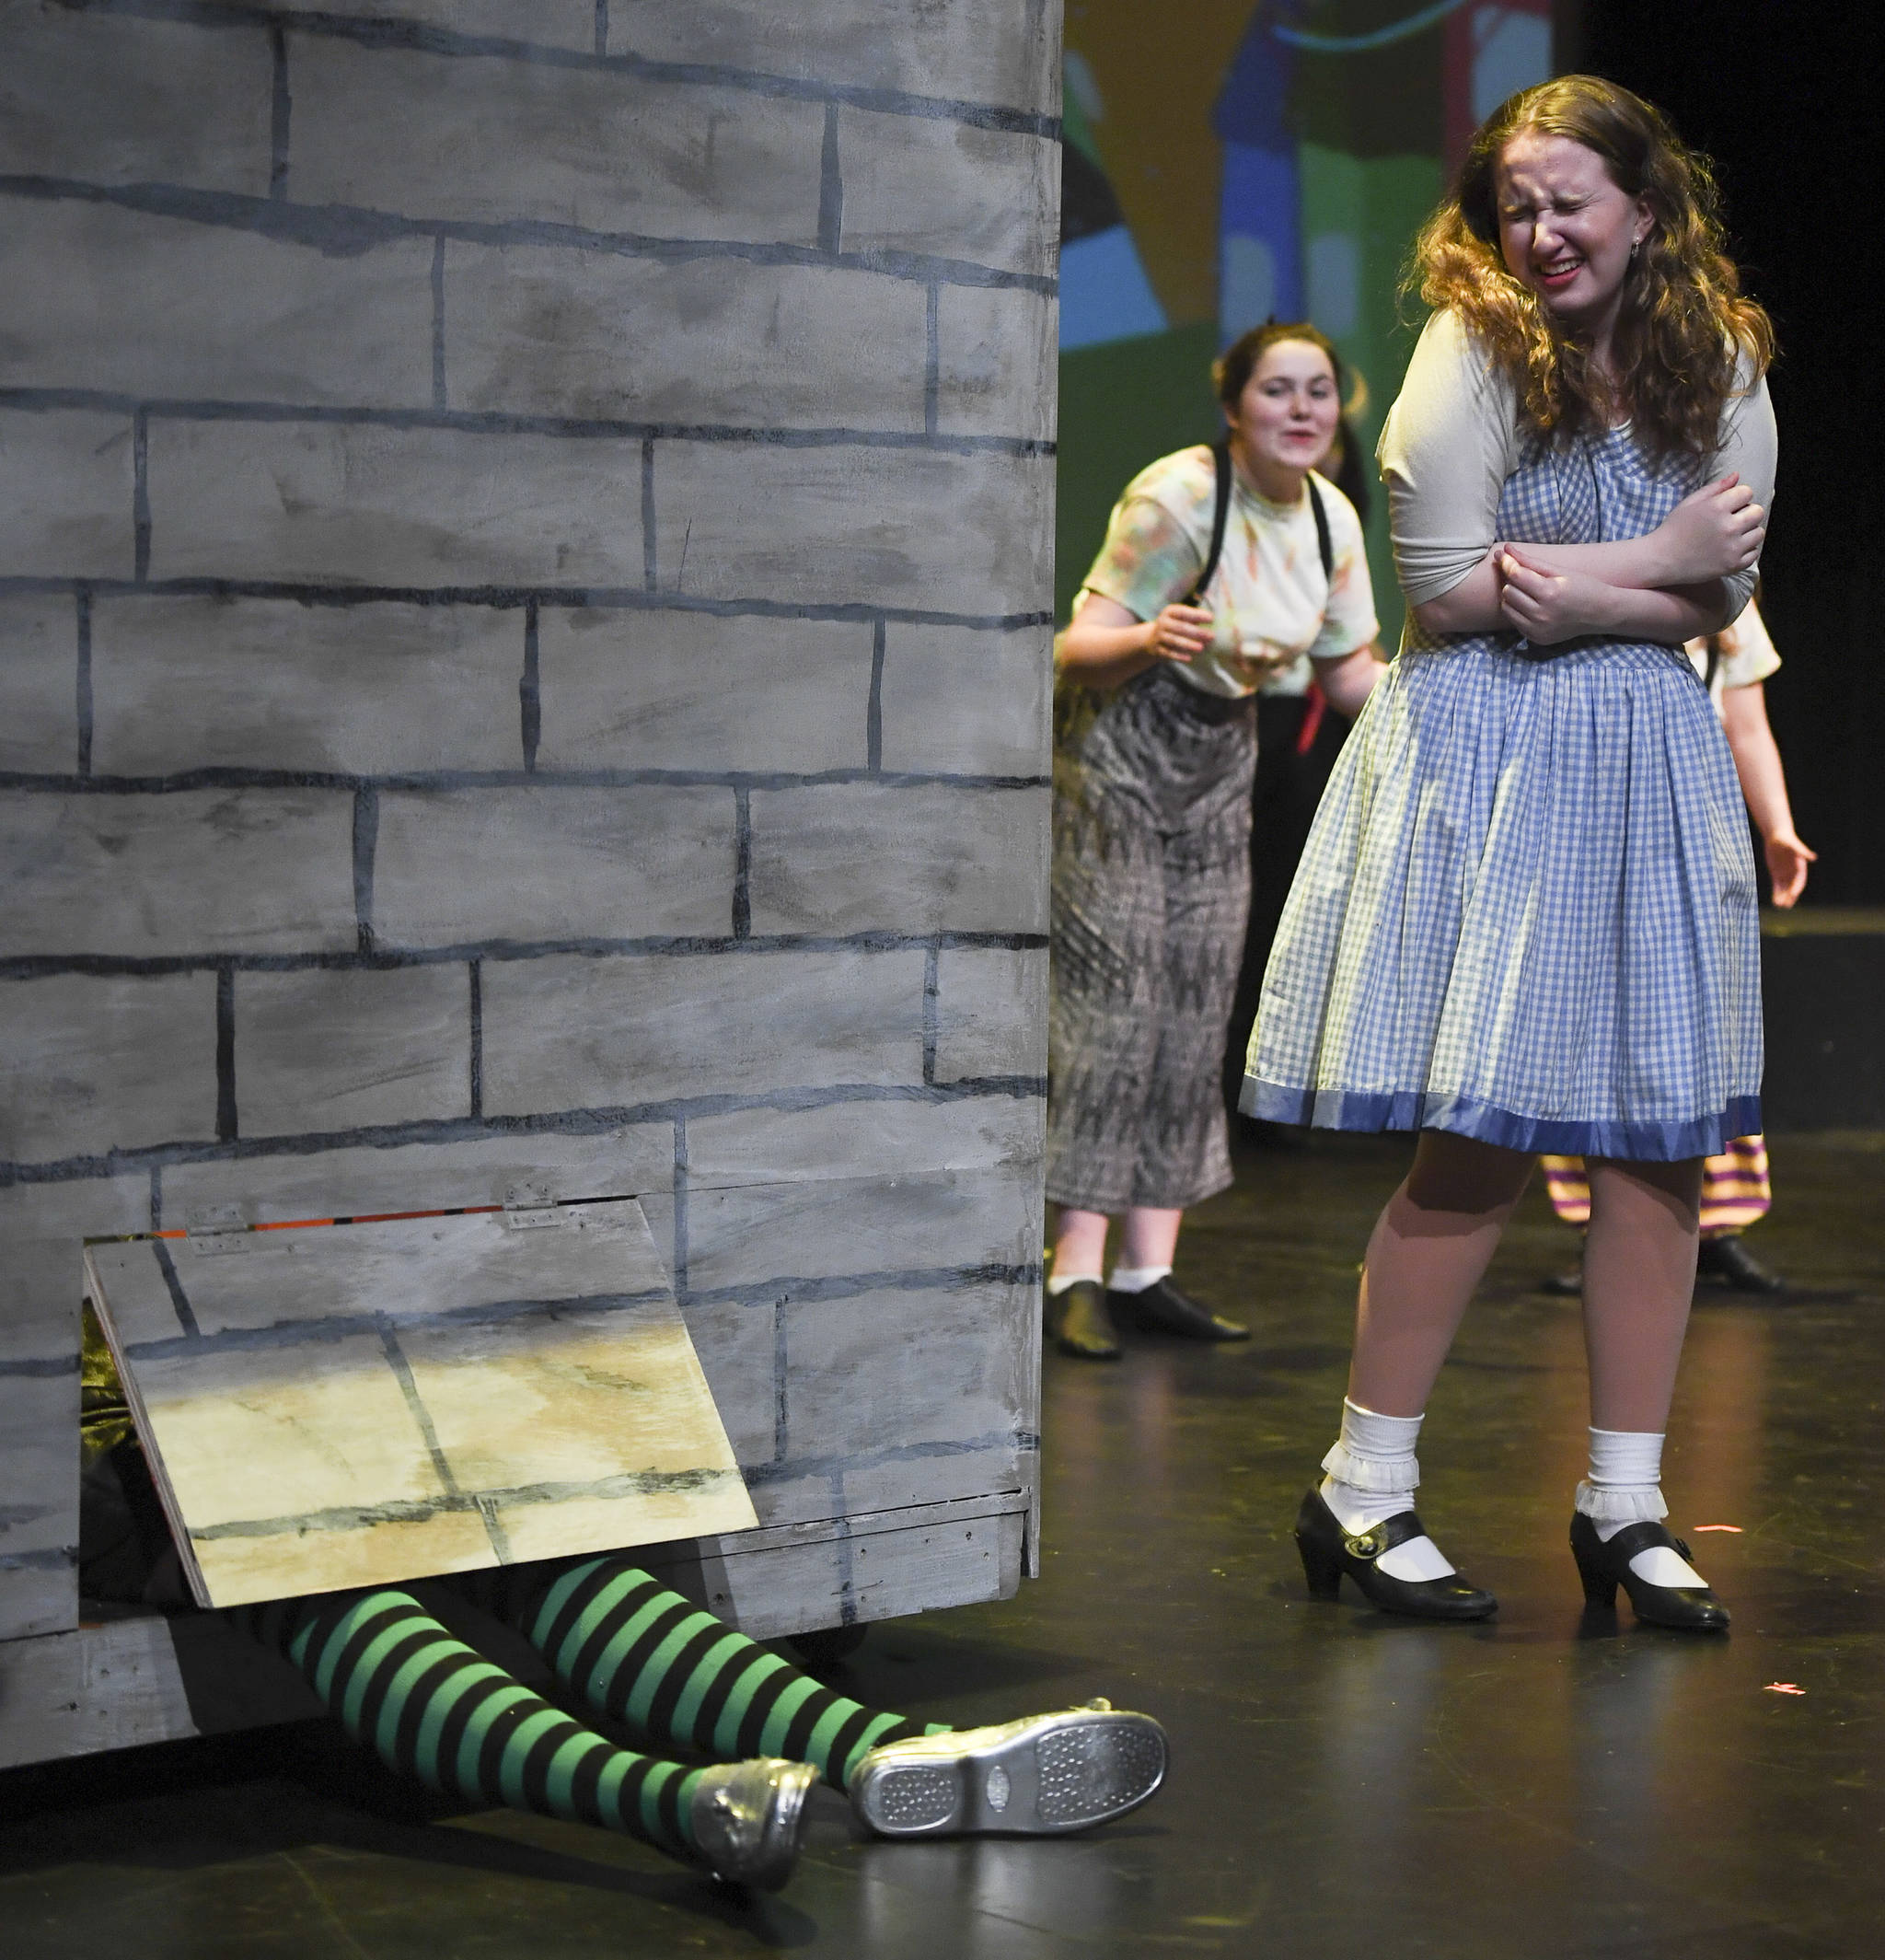 Thunder Mountain theater asks audience to ‘Choose Your Own Oz’